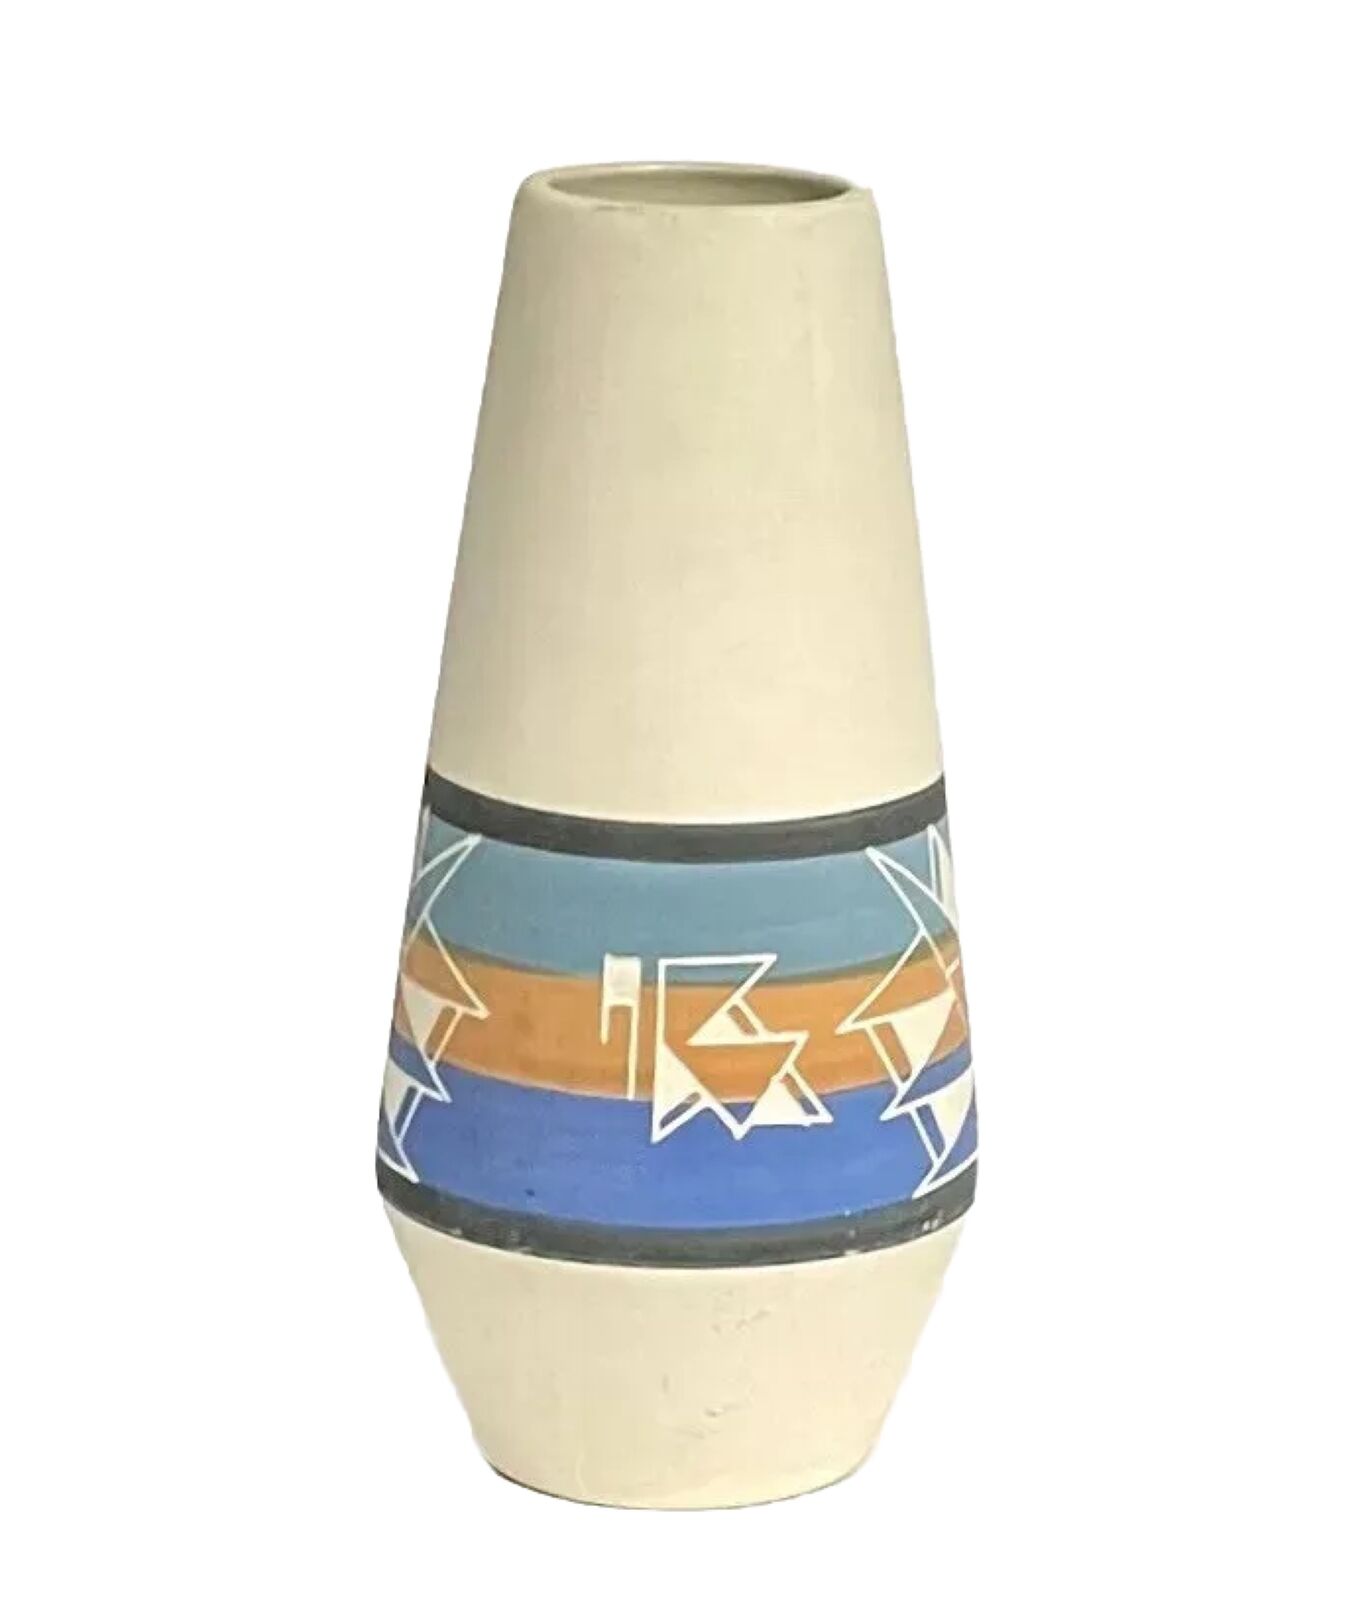 Sioux Native American Indian Pottery Vase Signed Marion Selwyn Jones SPRC 9.5”